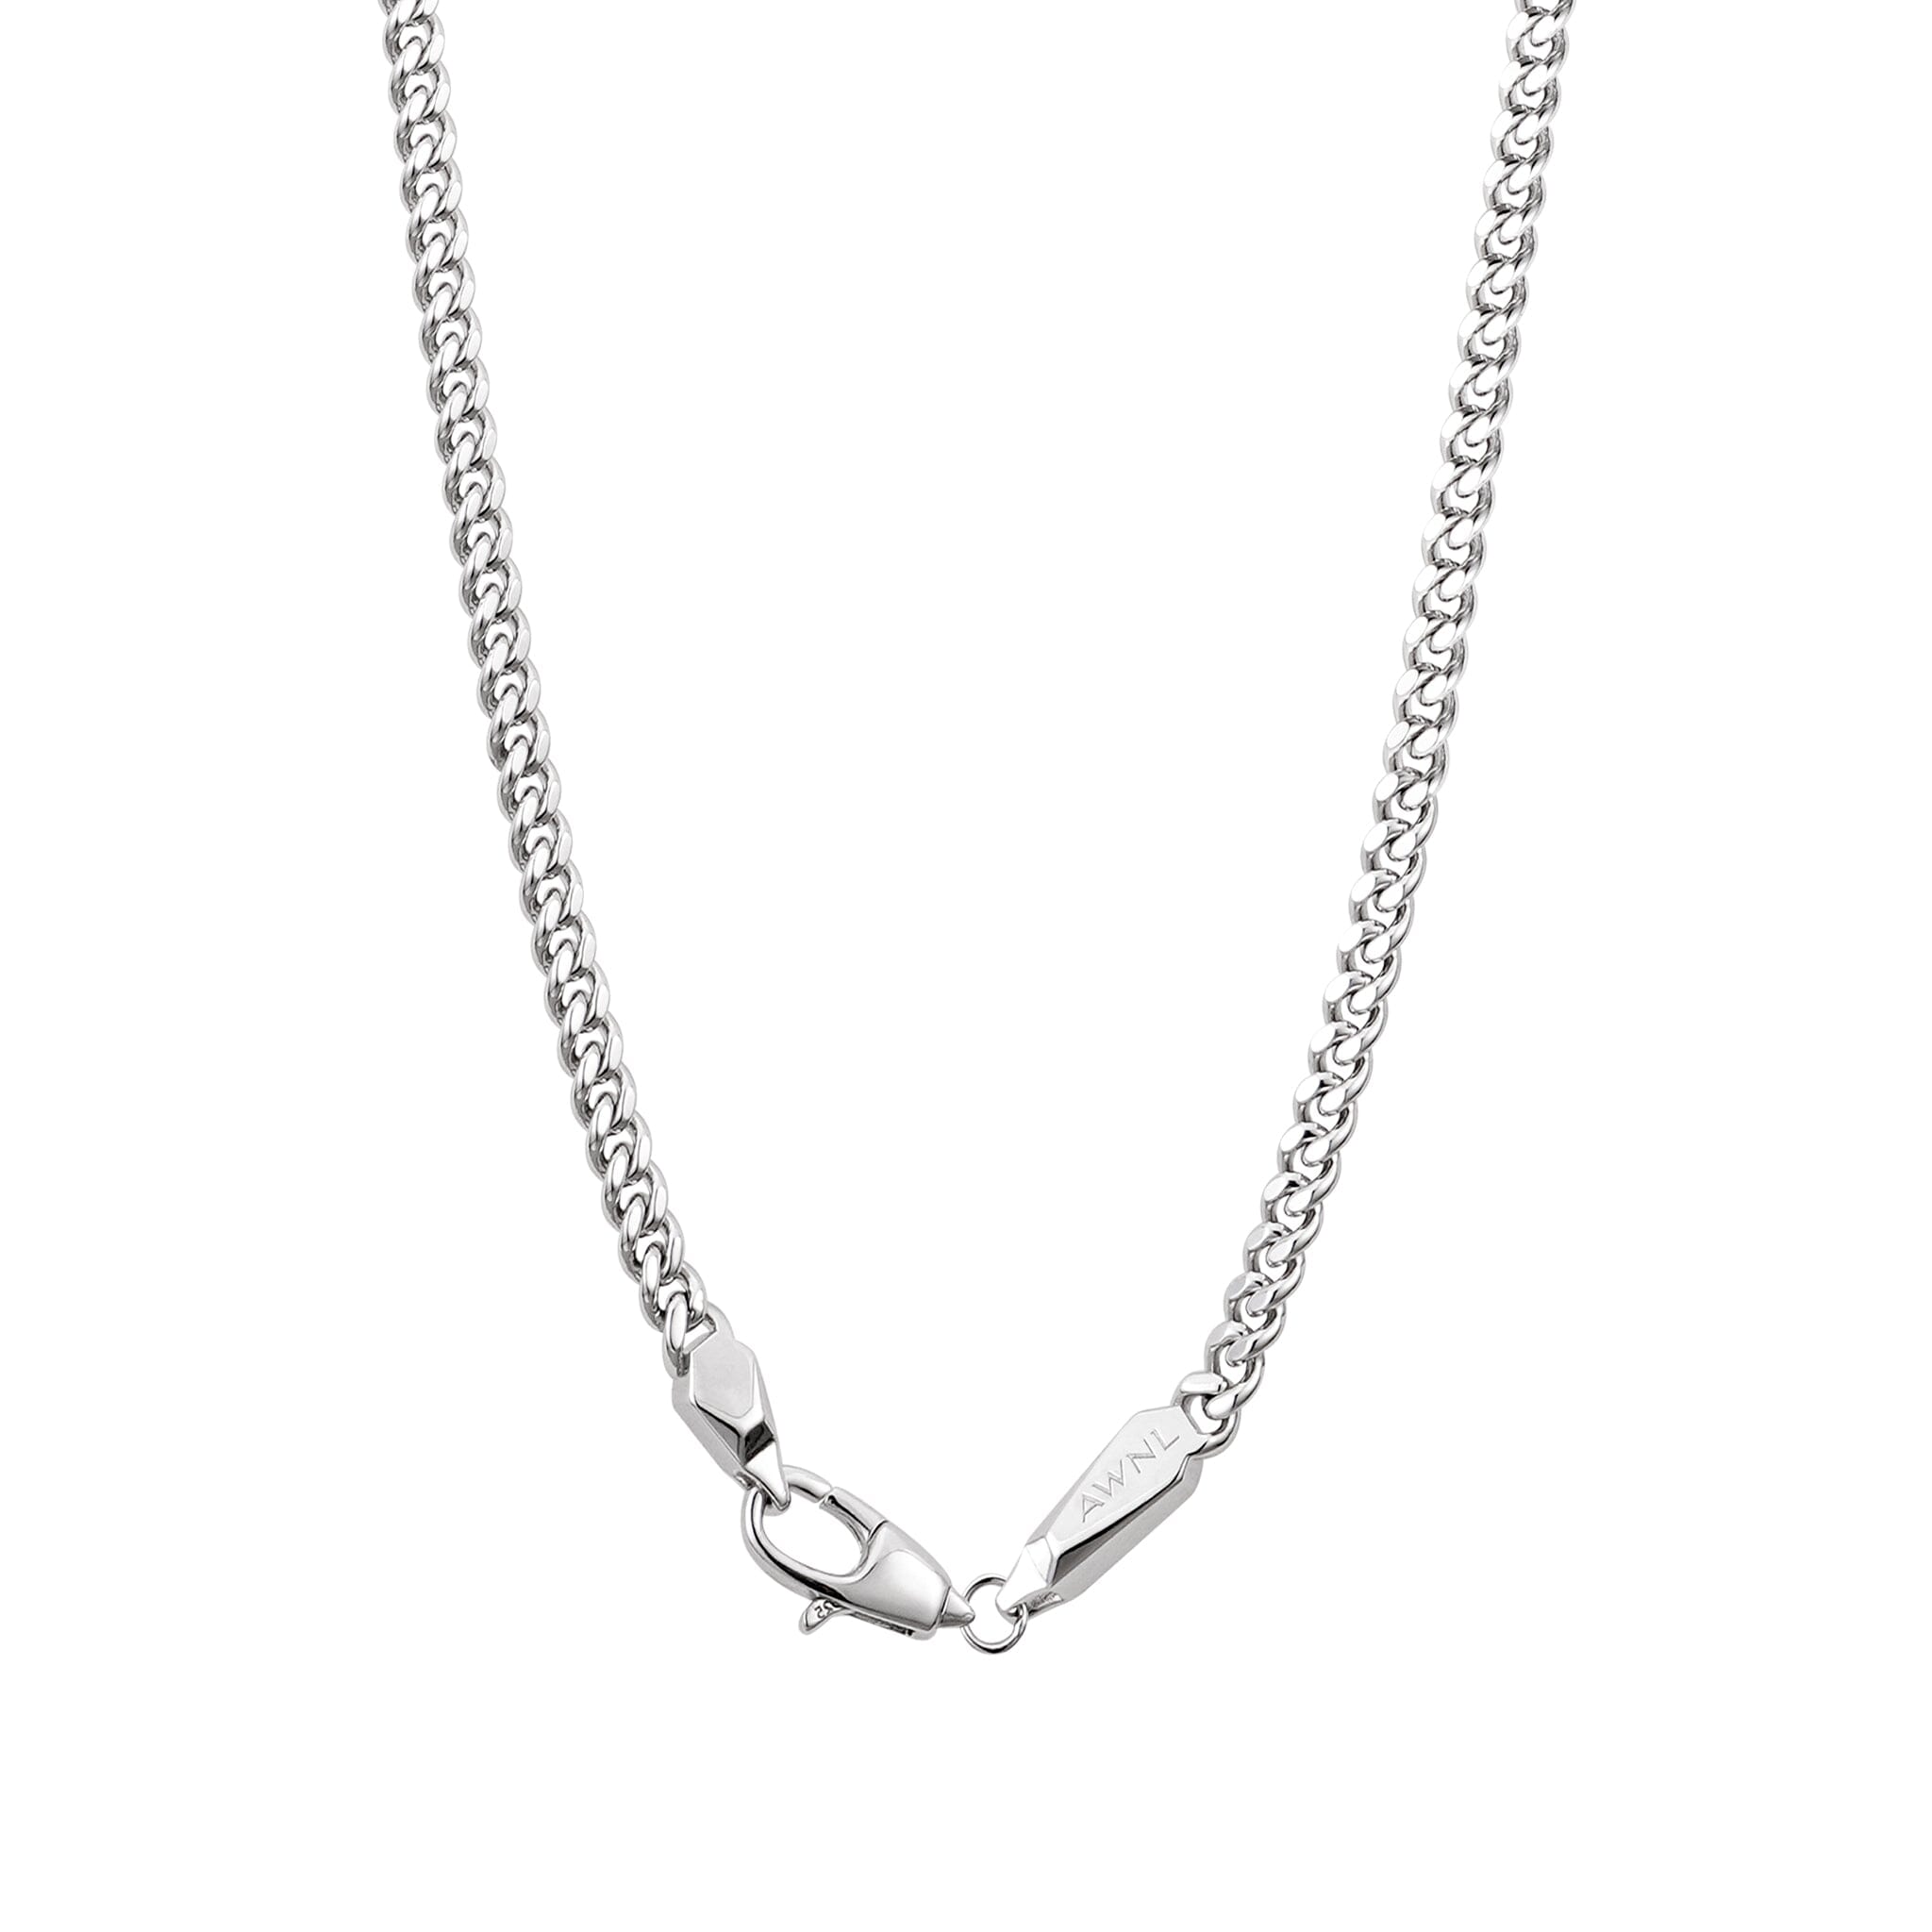 Men's Sterling Silver Curb Chain Chains WAA FASHION GROUP 